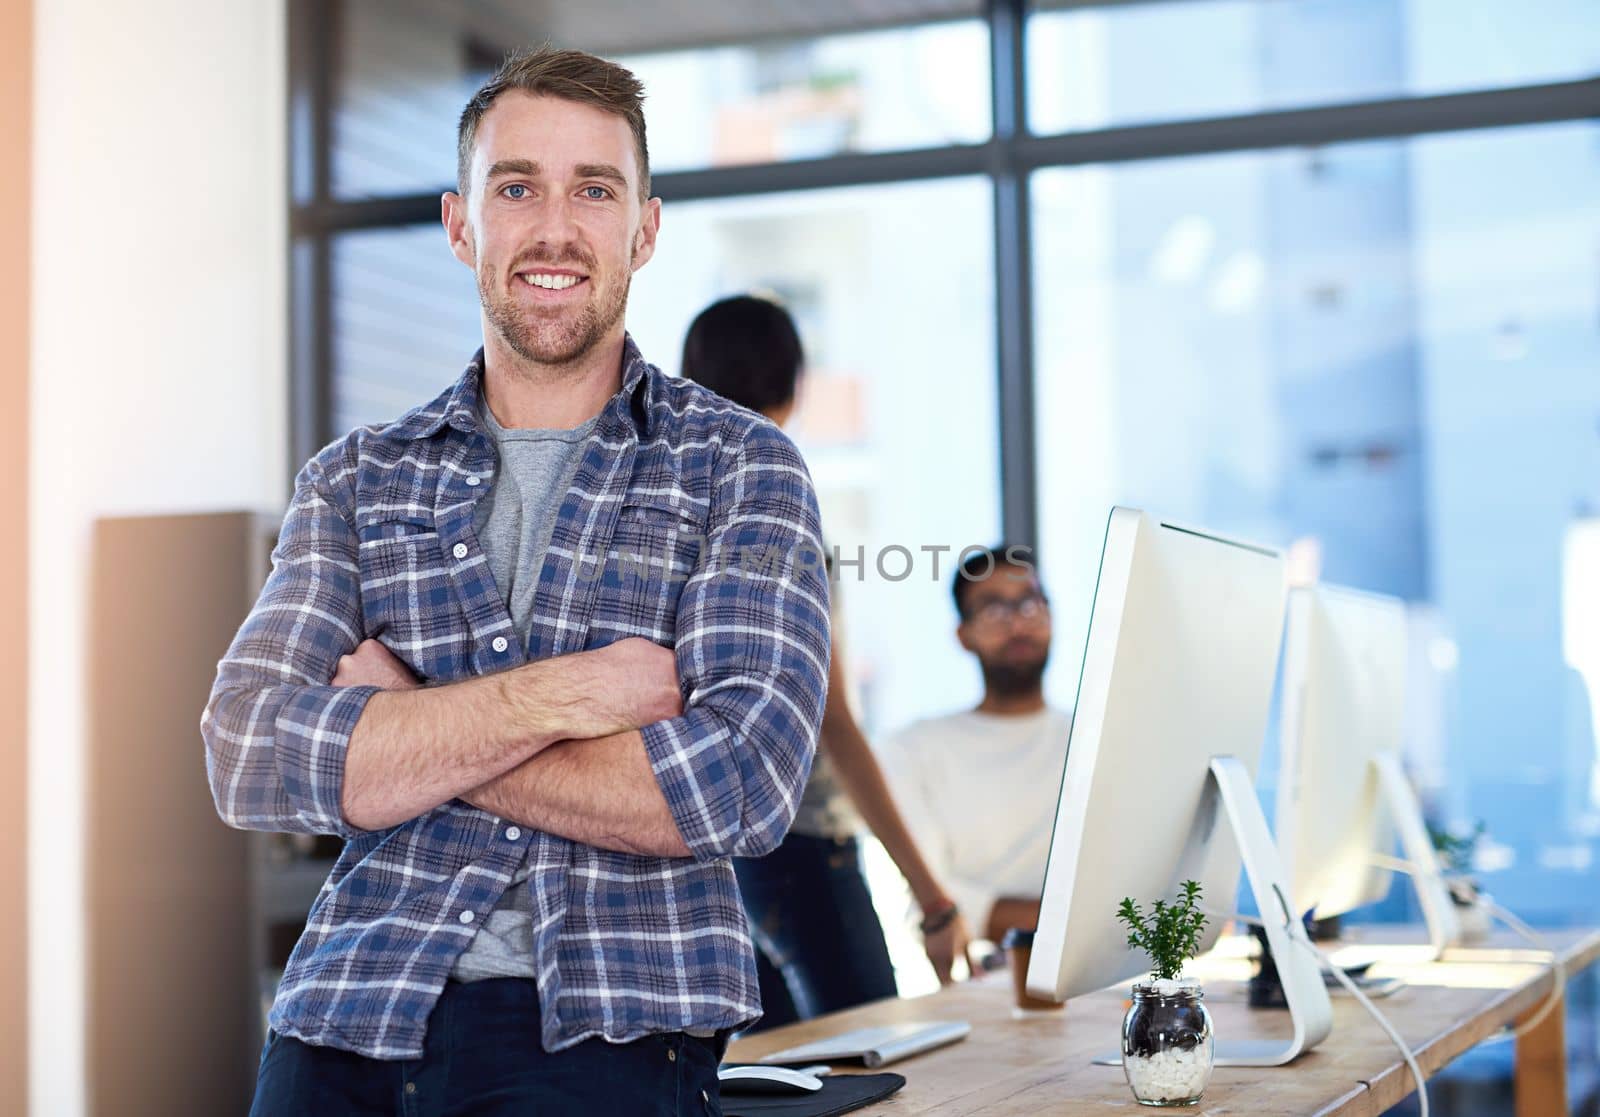 This is a great company to work for. Portrait of a confident young businessman standing in an office with his team in the background